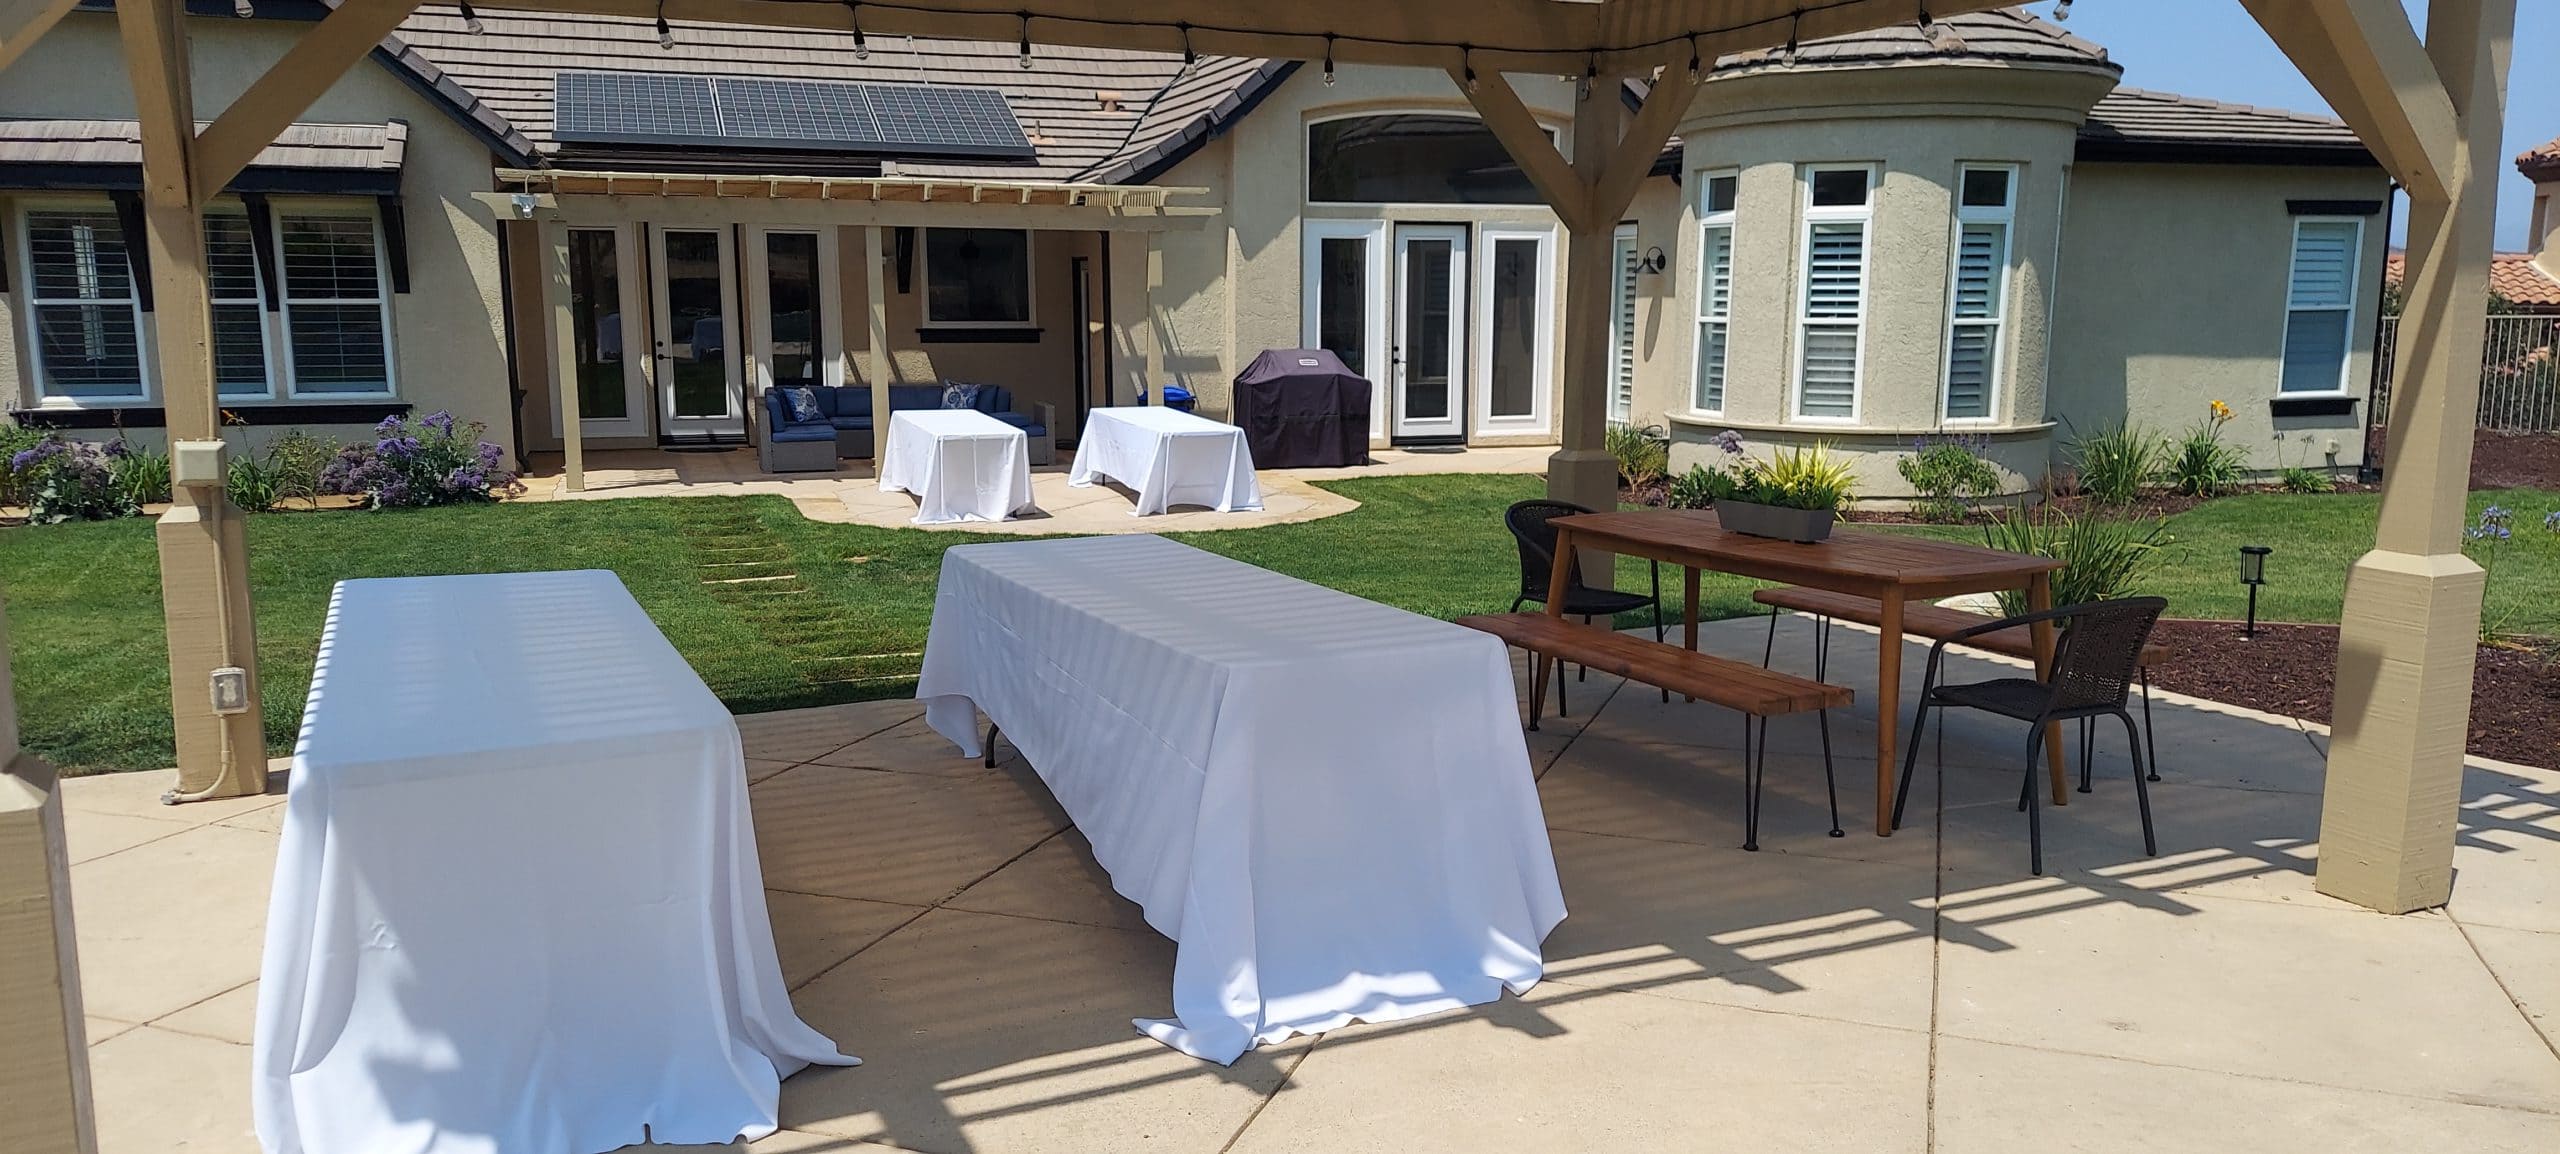 The Resort in Thousand Oaks - Event setup options - Dining